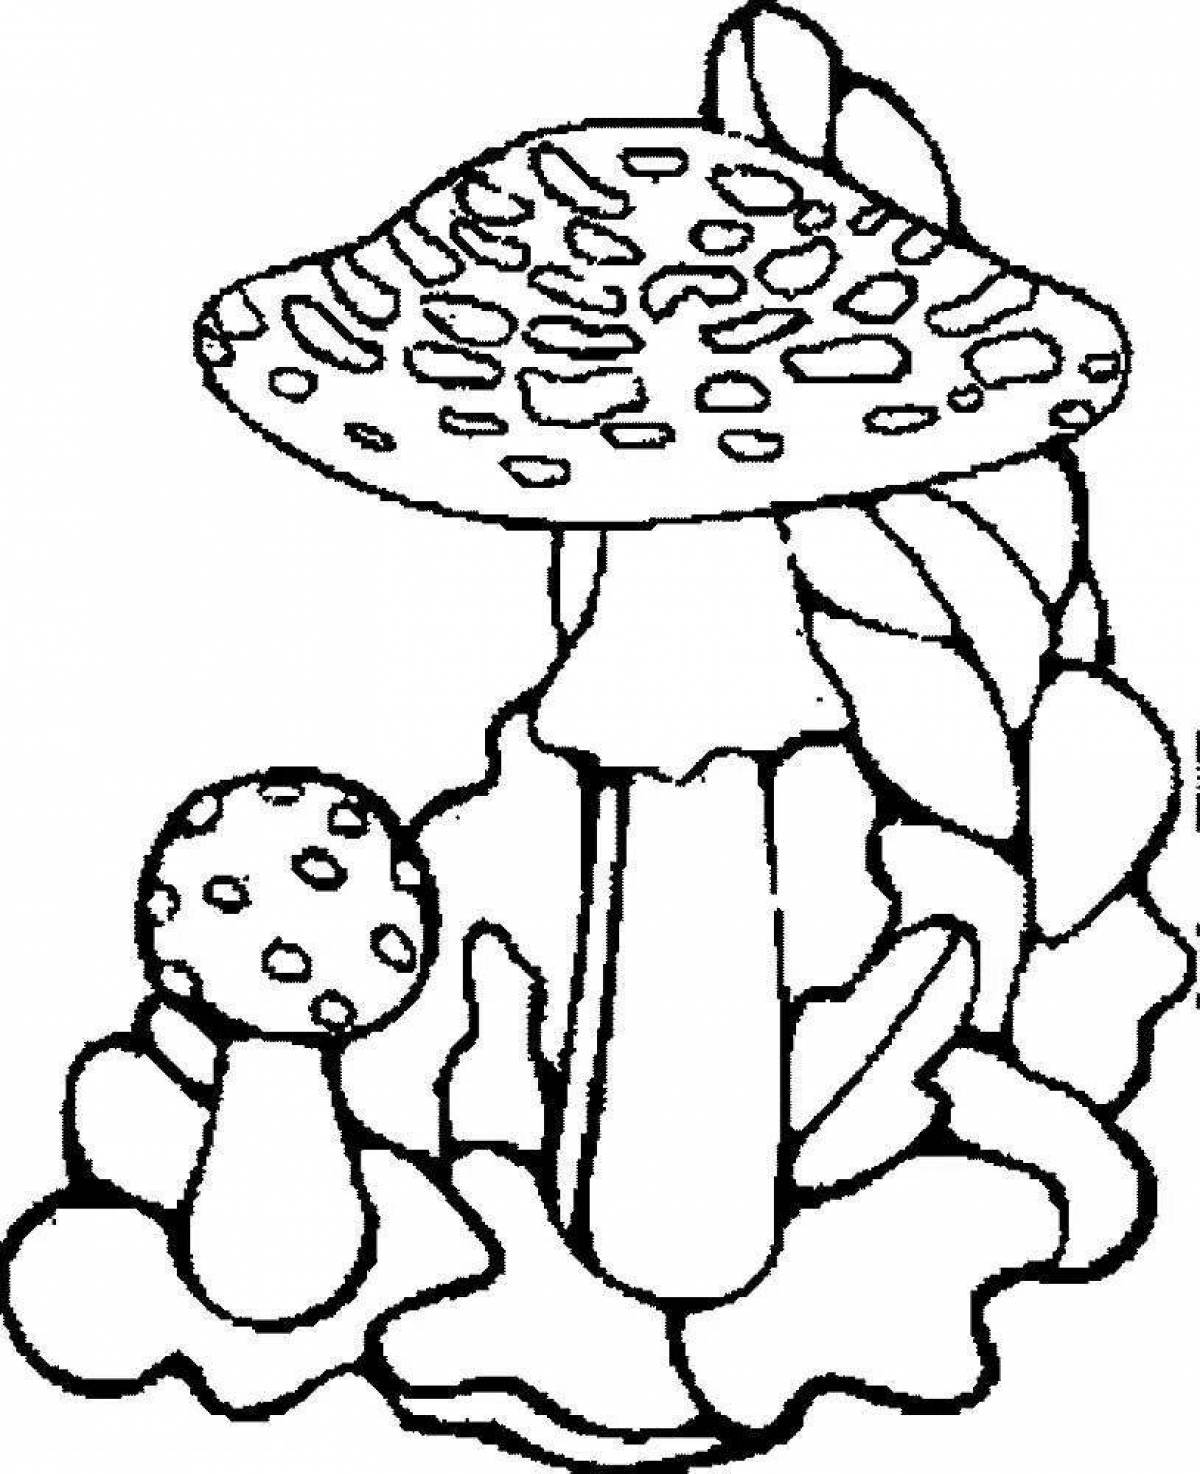 Coloring page captivating fly agaric mushroom